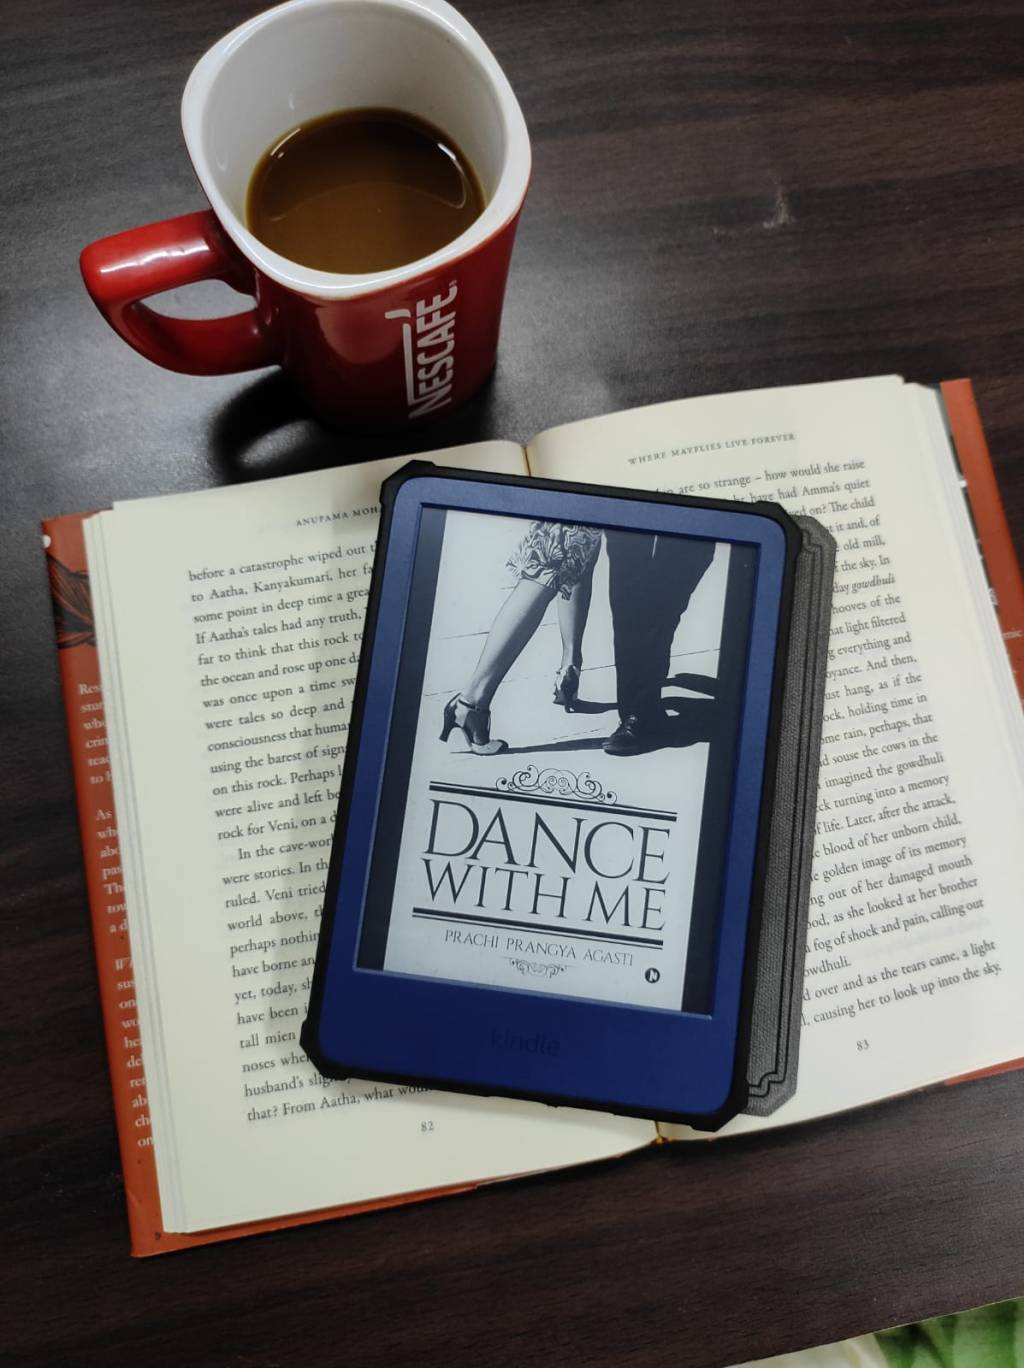 Do You Like Reading Heart-thobbing Romance Book? Dance With Me – Book Review